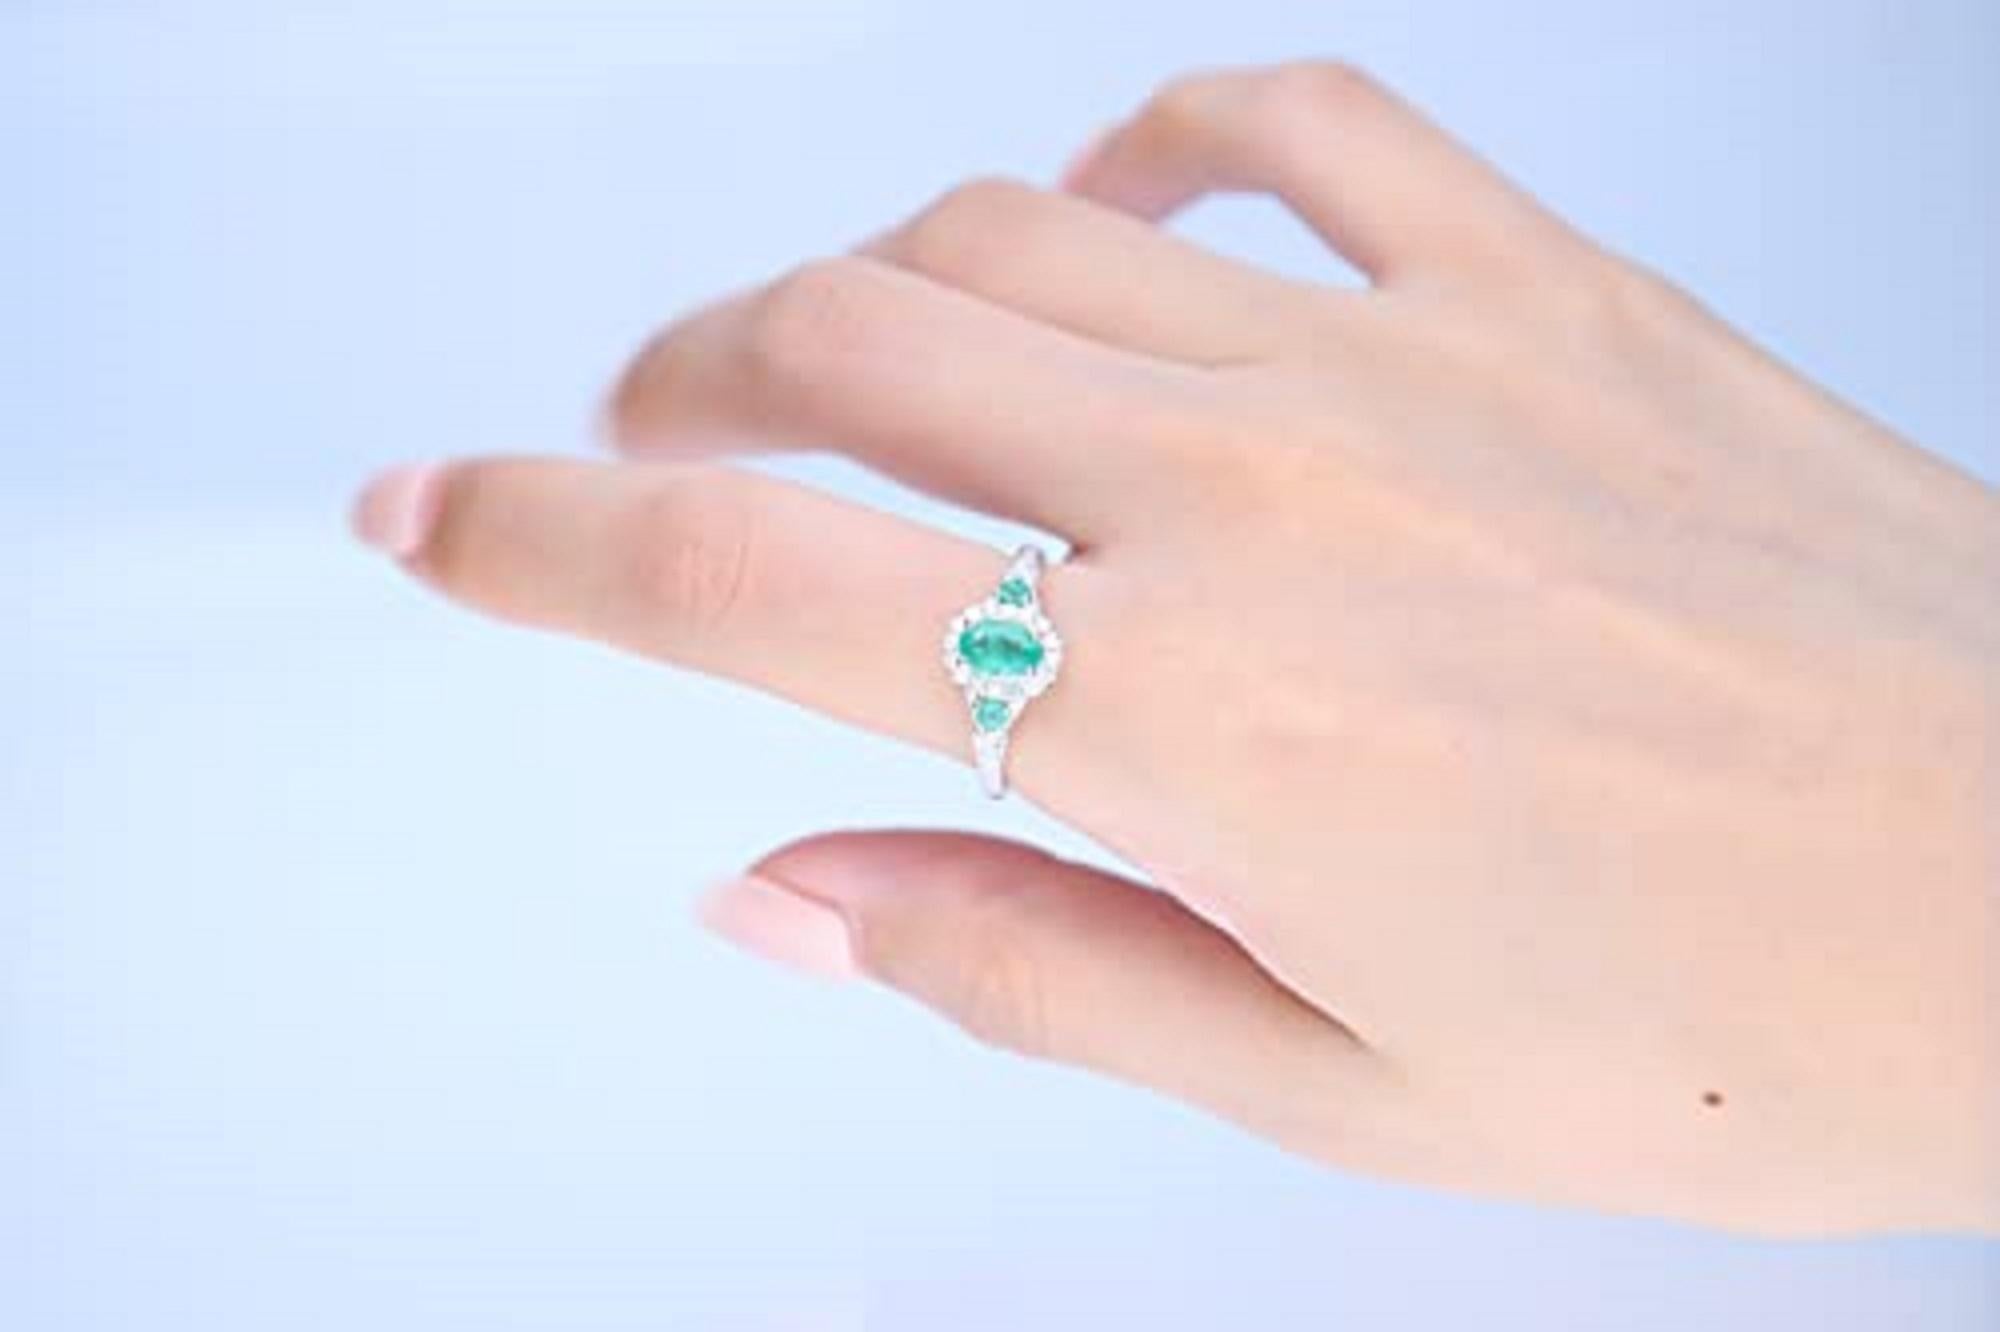 Decorate yourself in elegance with this Ring is crafted from 14-karat White Gold by Gin & Grace. This Ring is made up of 7x5 mm Oval-Cut Emerald (1 pcs) 0.72 carat, 2.5 mm Round-cut Emerald (2 pcs) 0.13 carat and Round-cut White Diamond (26 Pcs)